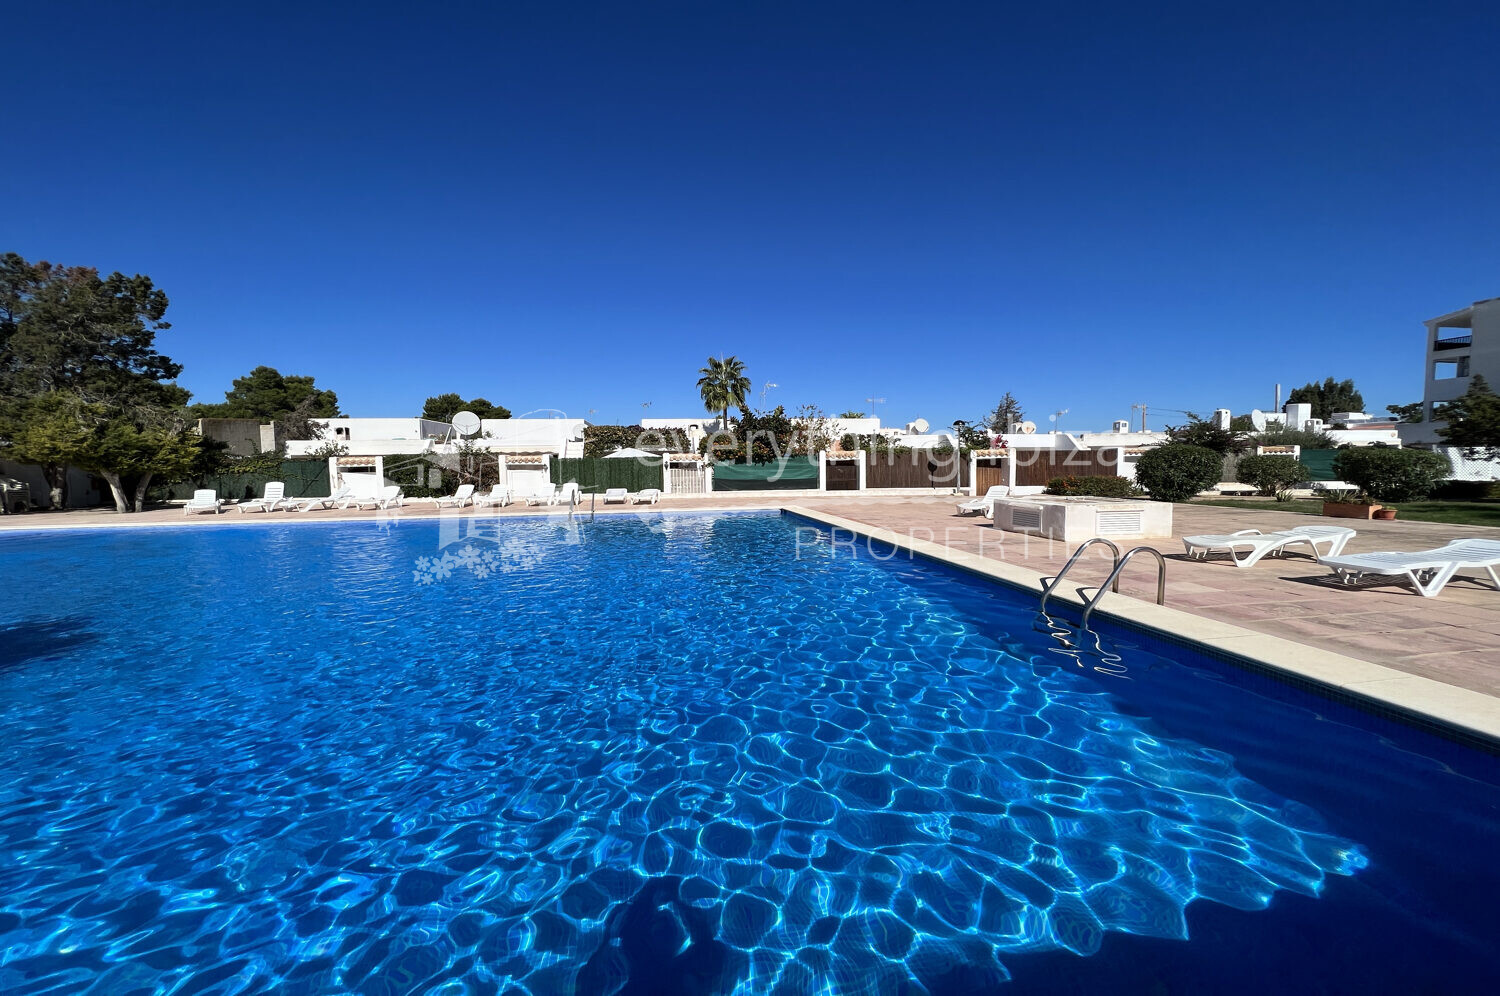 Charming Two Bedroomed Apartment Close to the Beach, ref. 1498, for sale in Ibiza by everything ibiza Properties